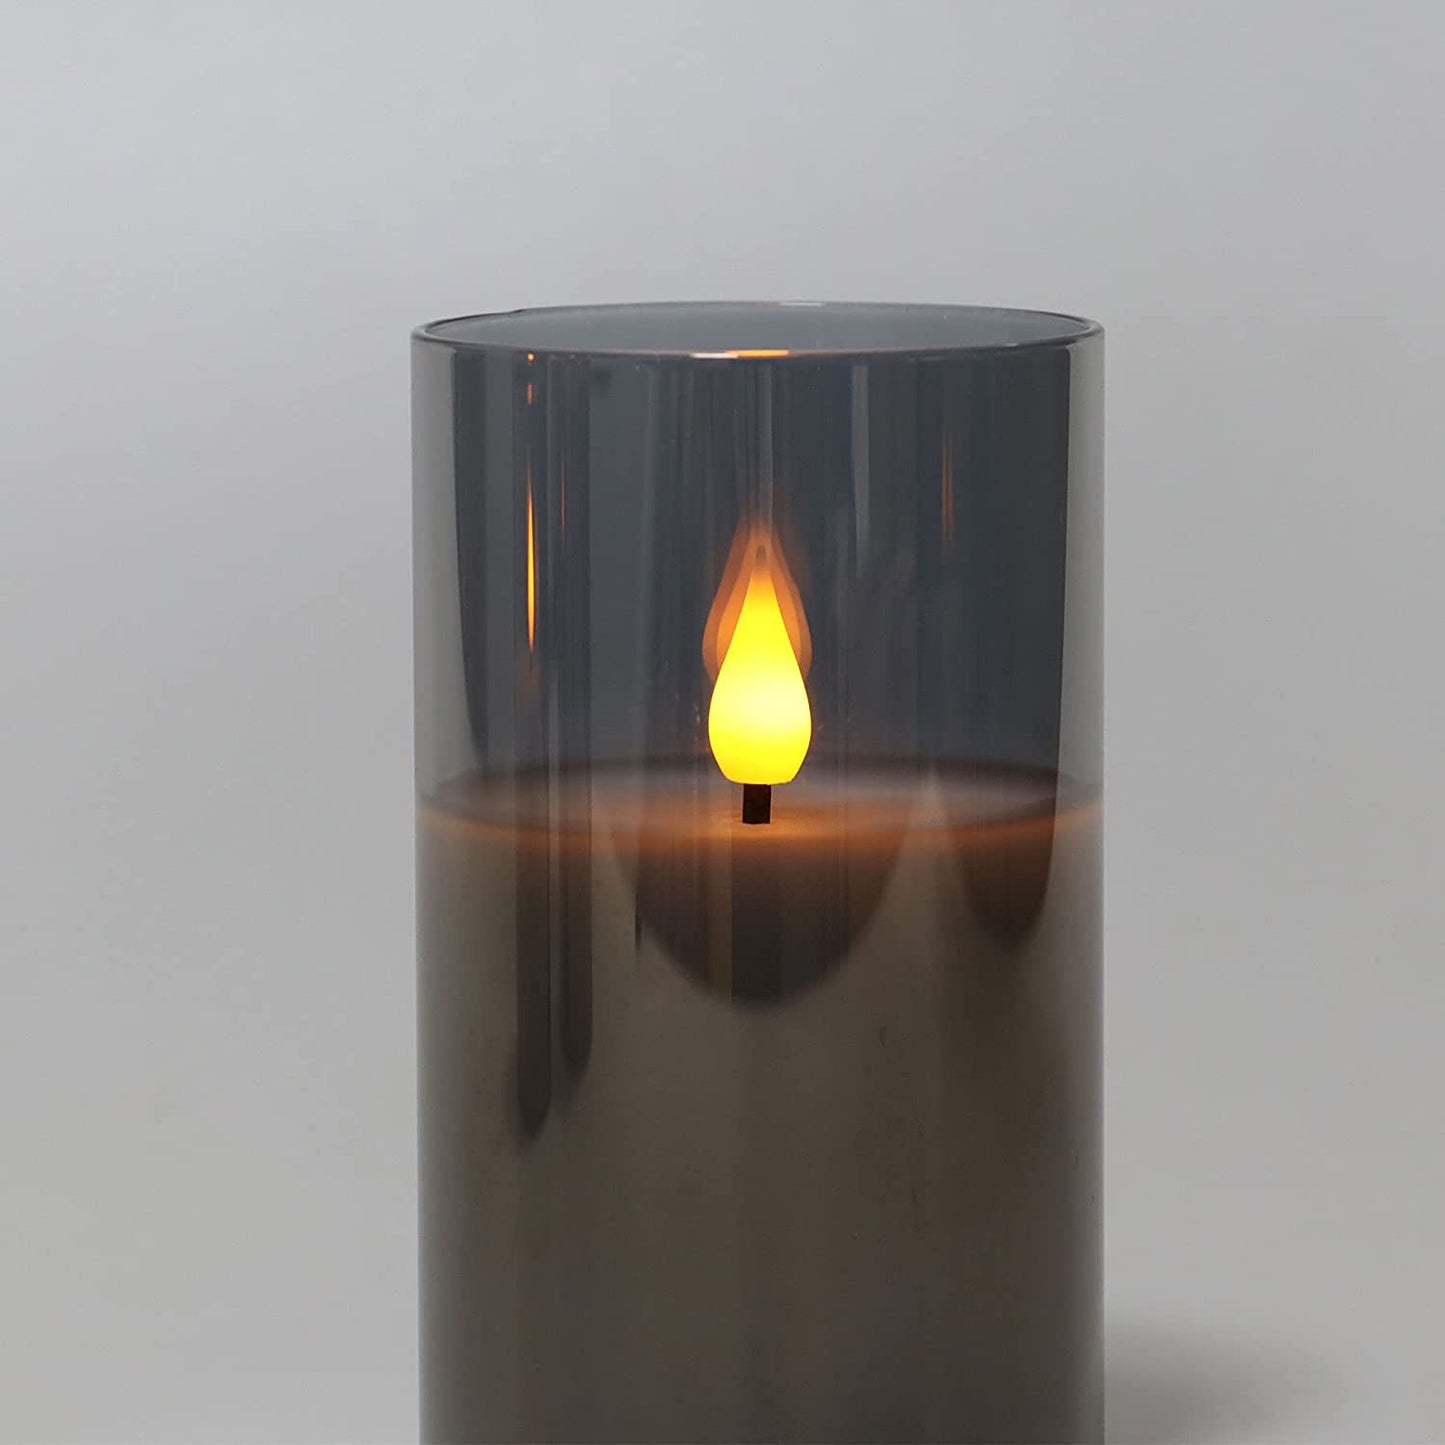 Gray Glass Battery Operated LED Candles with Remote, Flameless Candle Gift Set, Warm White Light - Include 6 Batteries